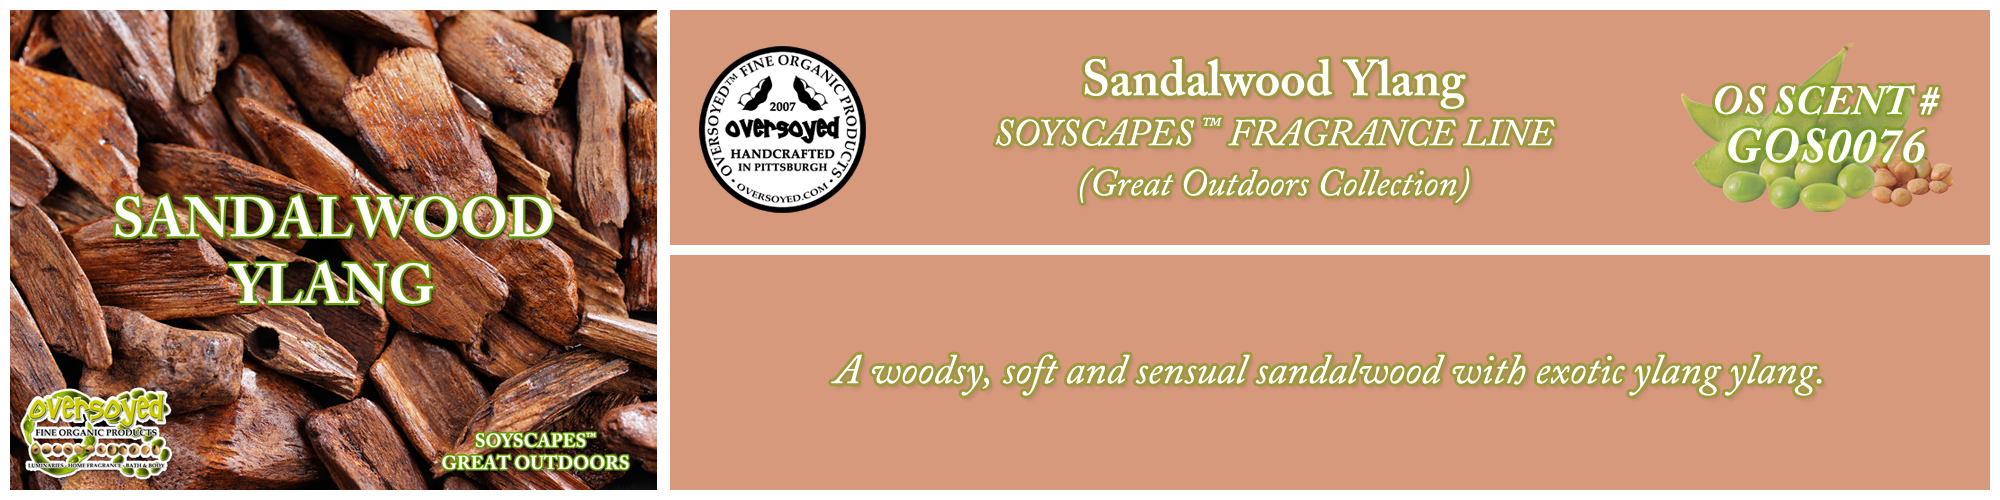 Sandalwood Ylang Handcrafted Products Collection